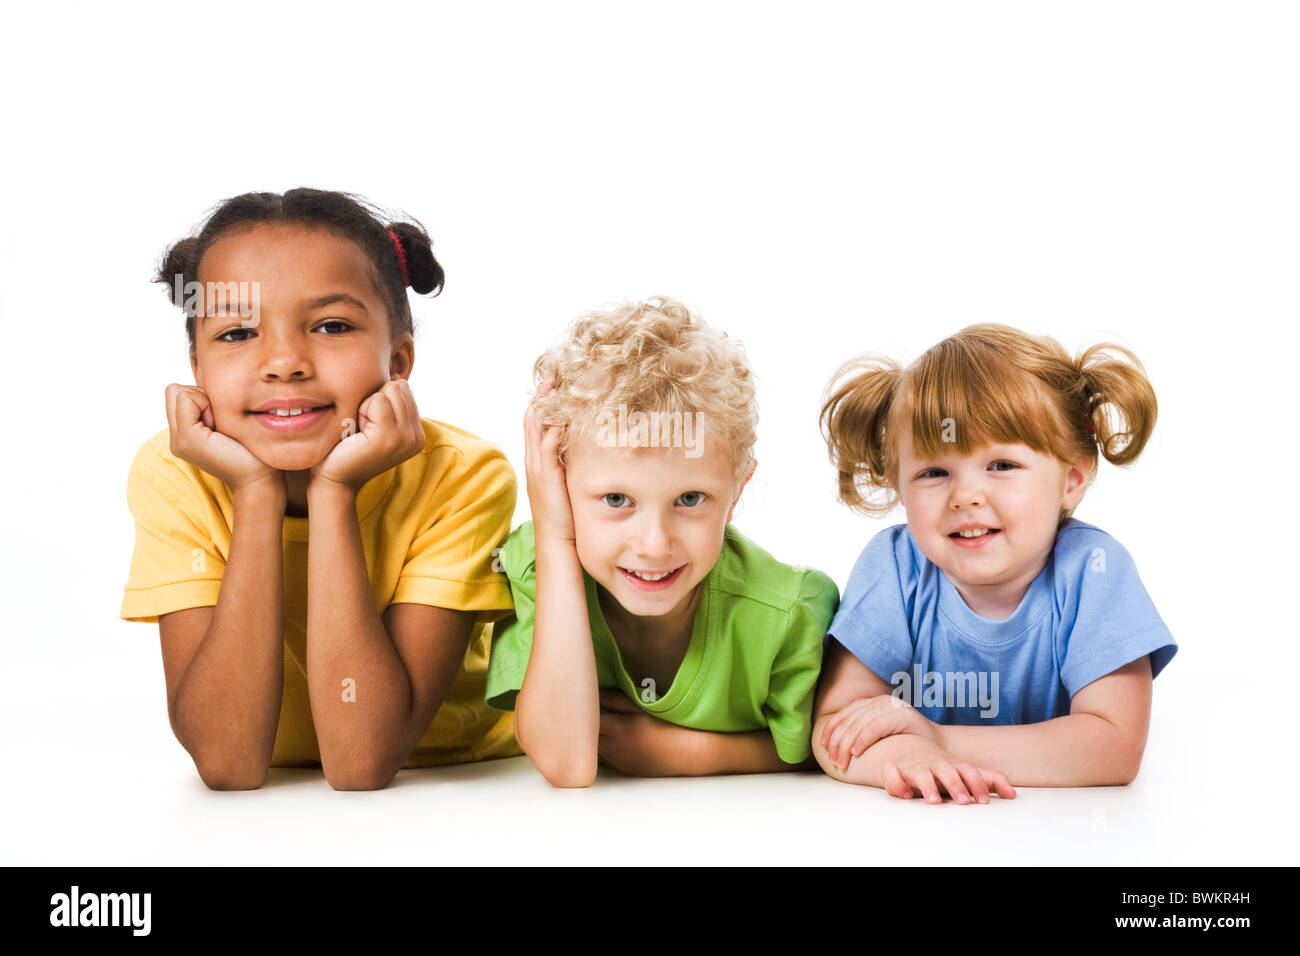 Row of children smiling and resting together Stock Photo